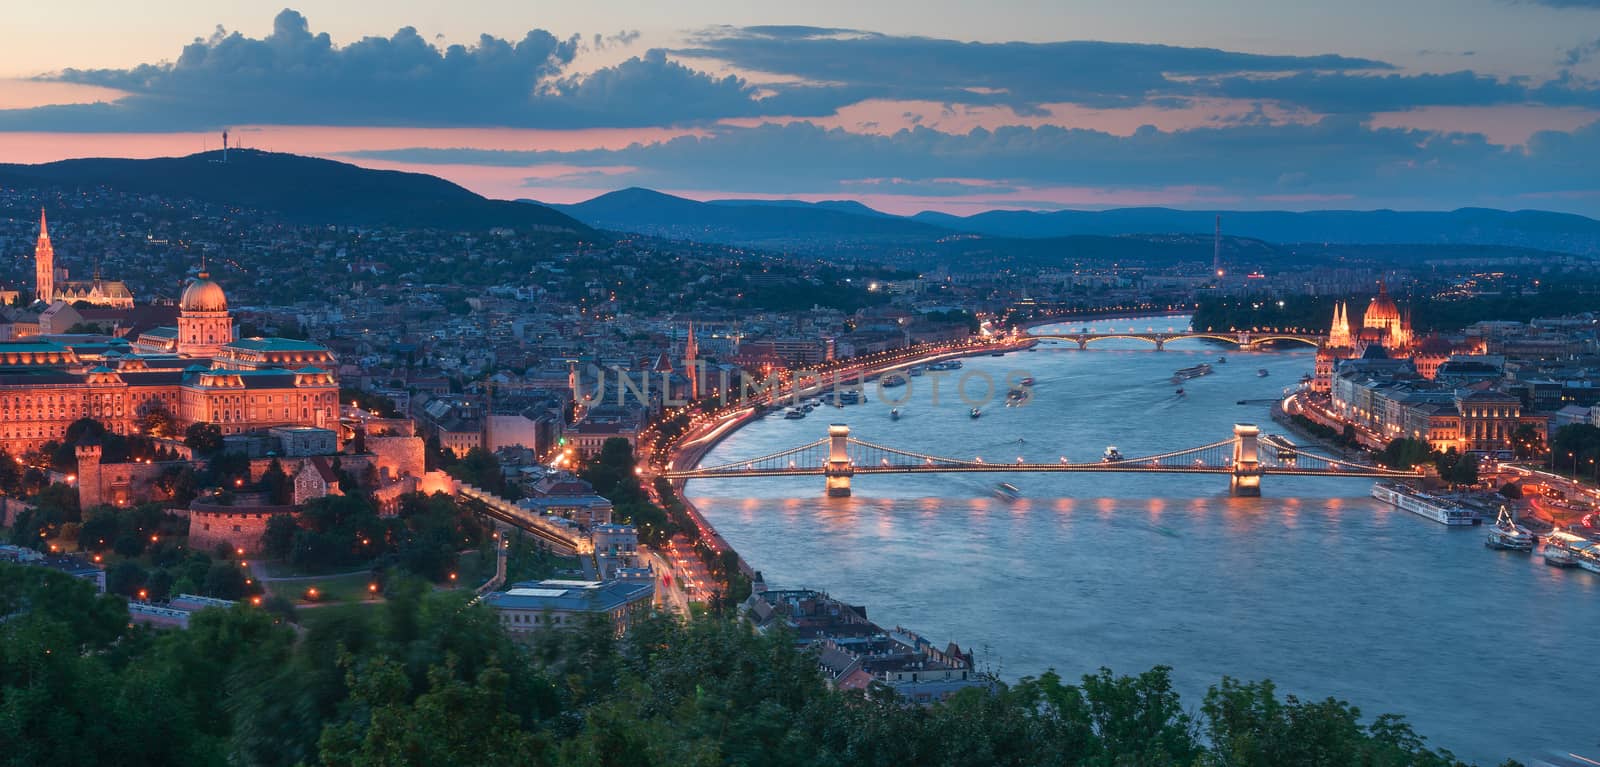 Gelert hill view of Szechenyi Bridge and Buda Castle by adonis_abril